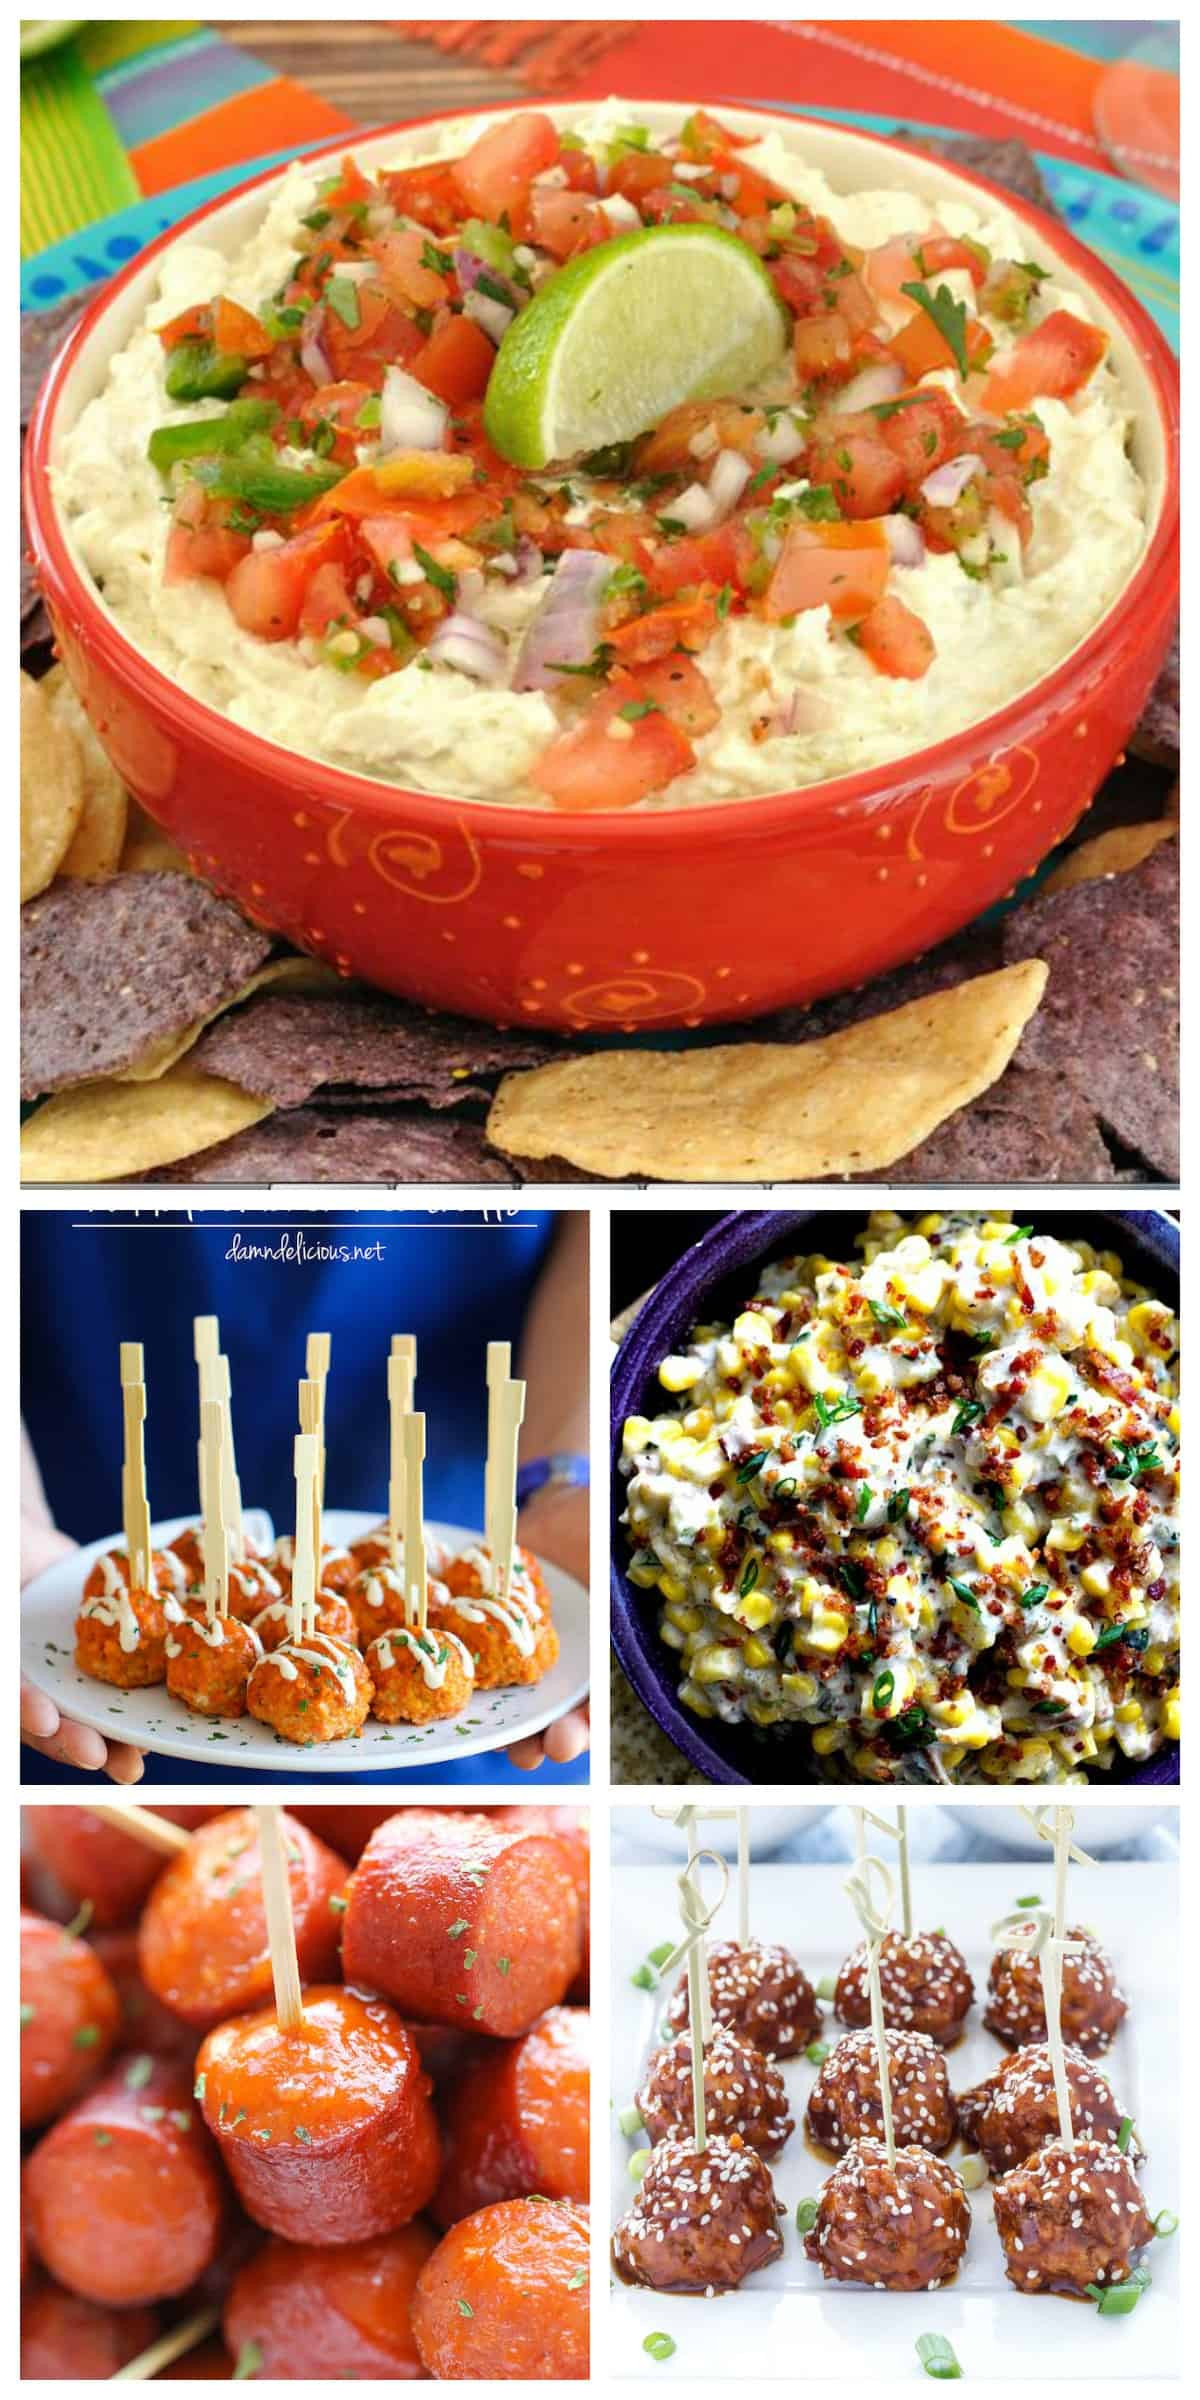 14 Easy Slow Cooker Appetizers
 27 Slow Cooker Appetizers Simple and Seasonal